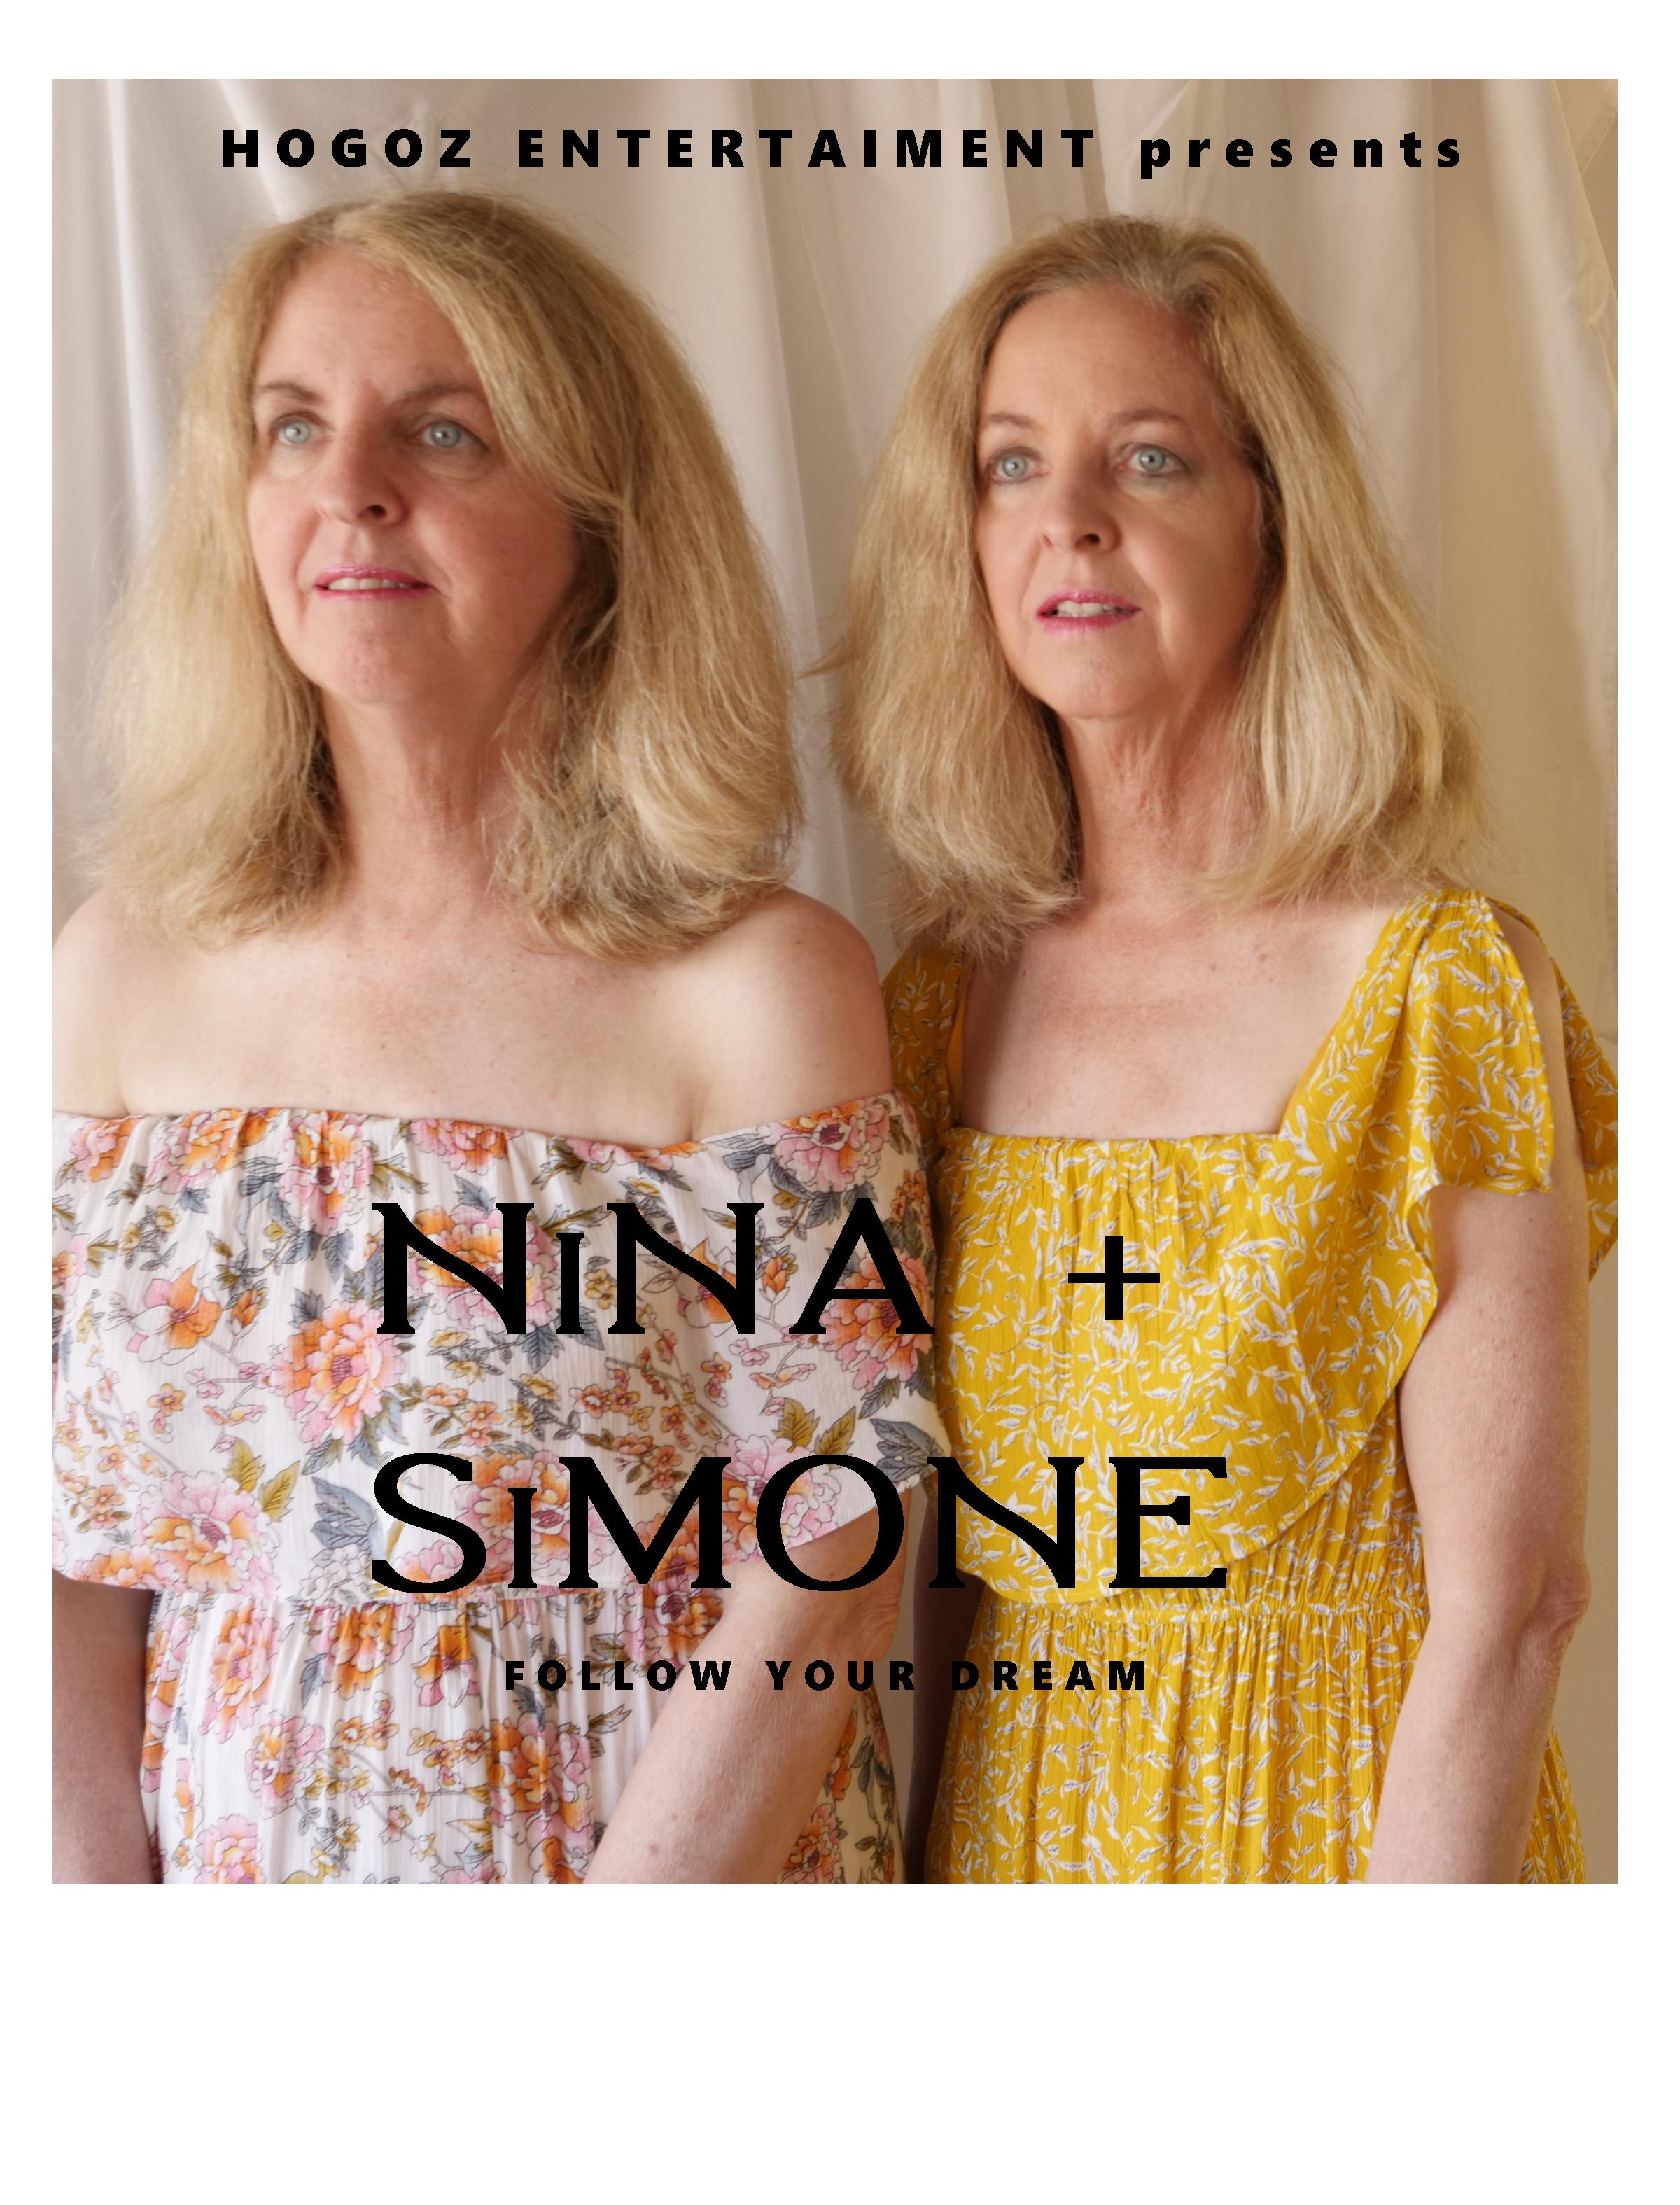 Key art for Nina + Simone showing the two main female characters.